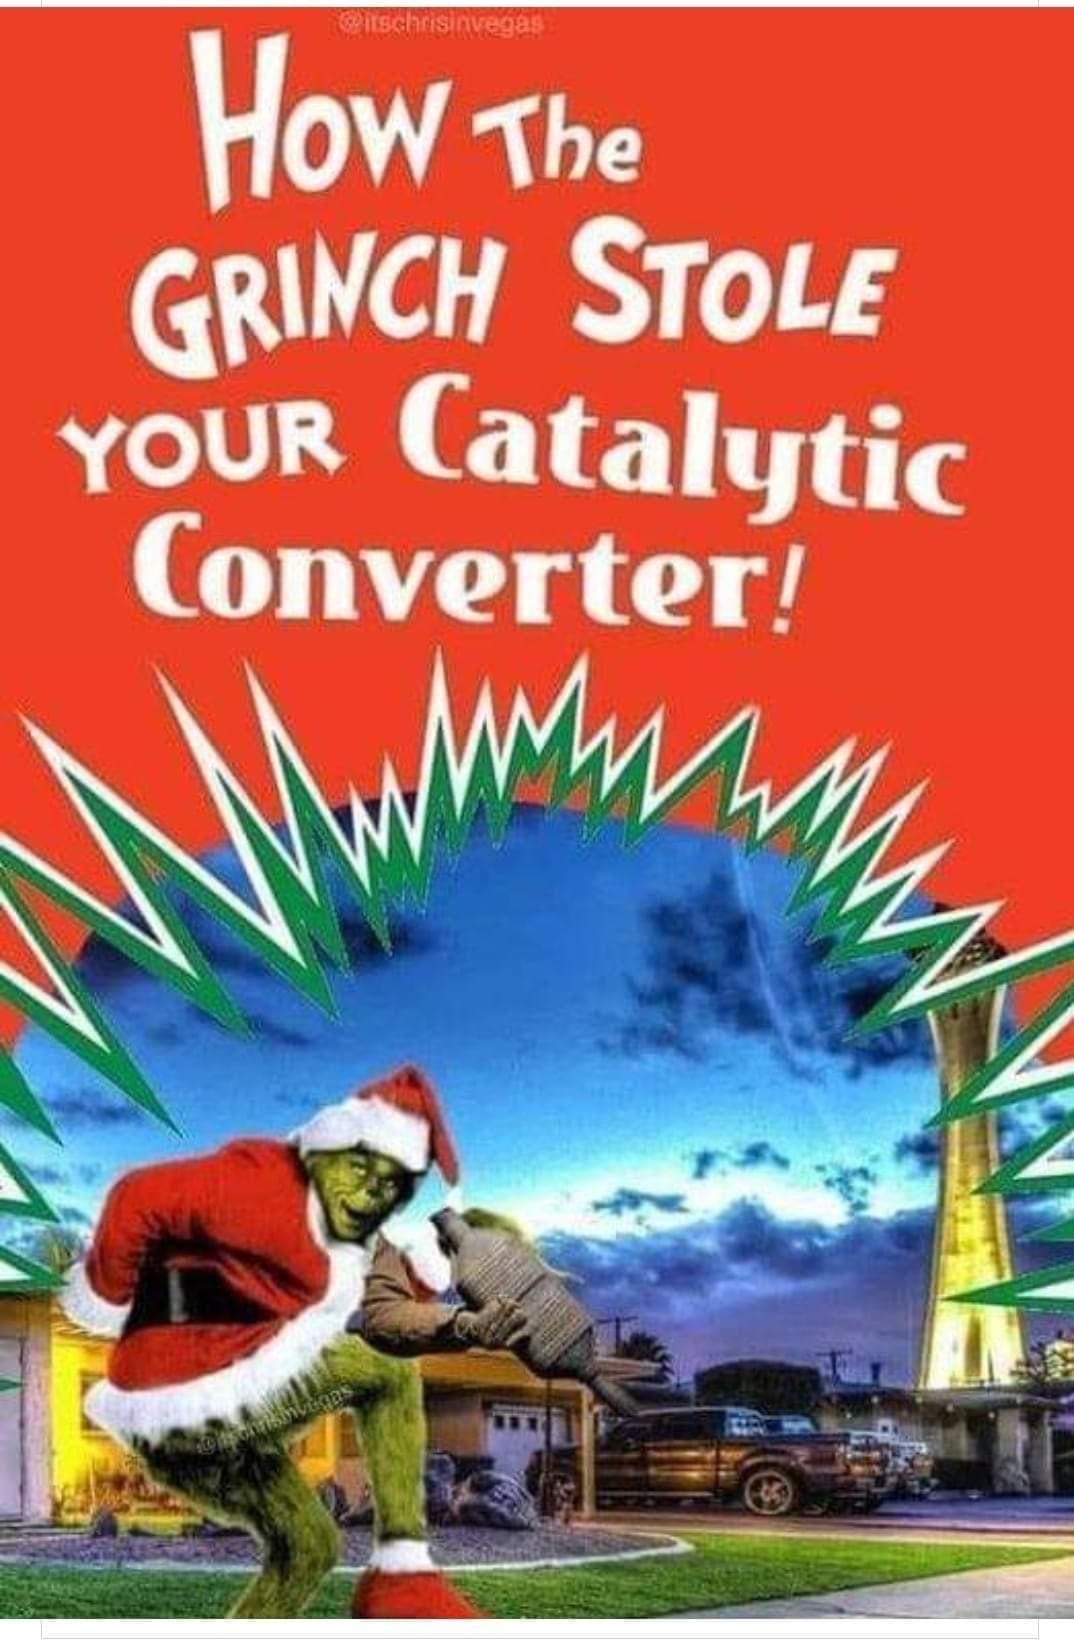 grinch stole your catalytic converter - itschuisinvegas How The Grinch Stole Your Catalytic Converter! investas